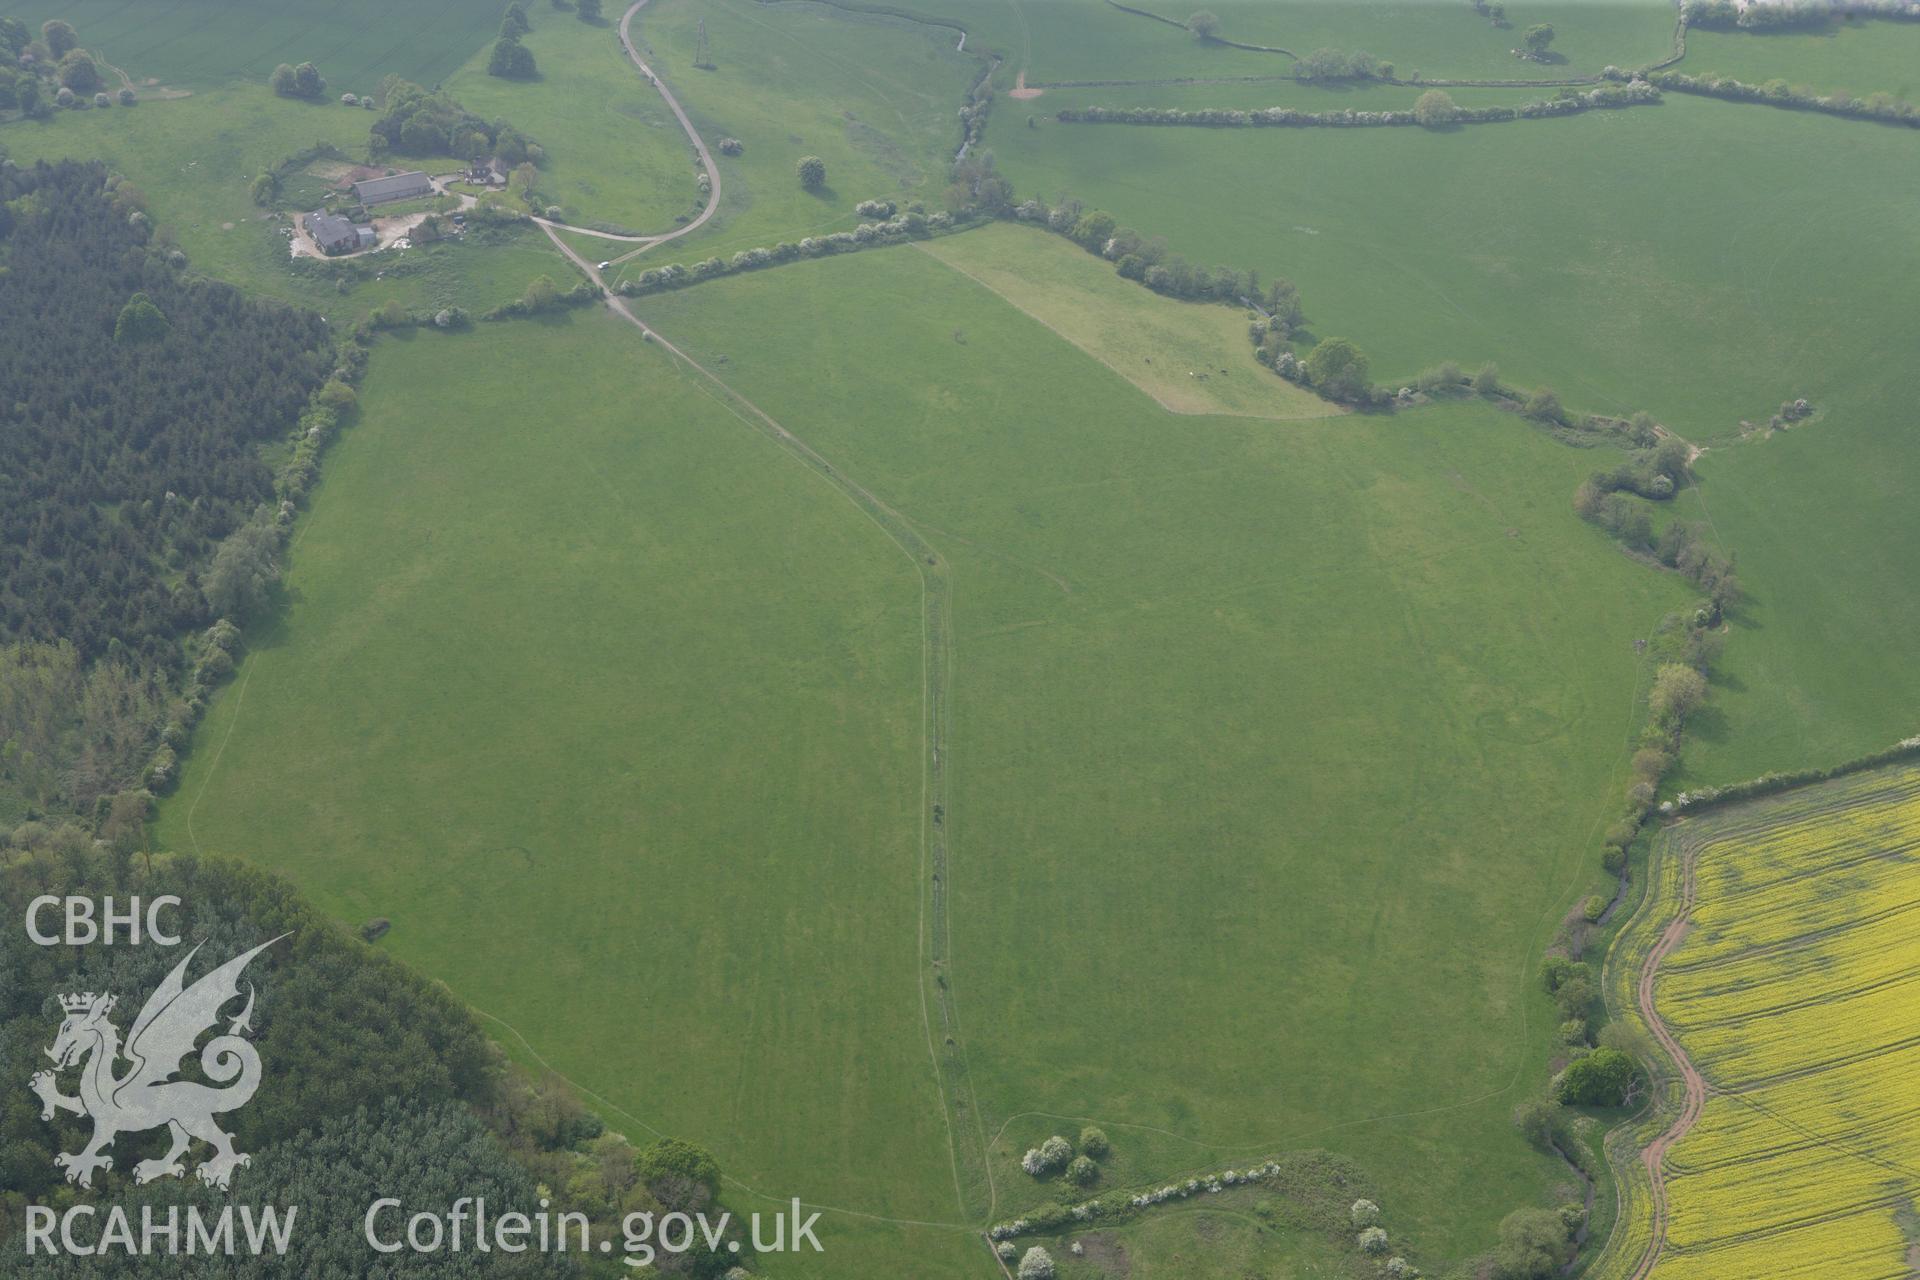 RCAHMW colour oblique photograph of Monks Ditch, landscape from east. Taken by Toby Driver on 26/04/2011.